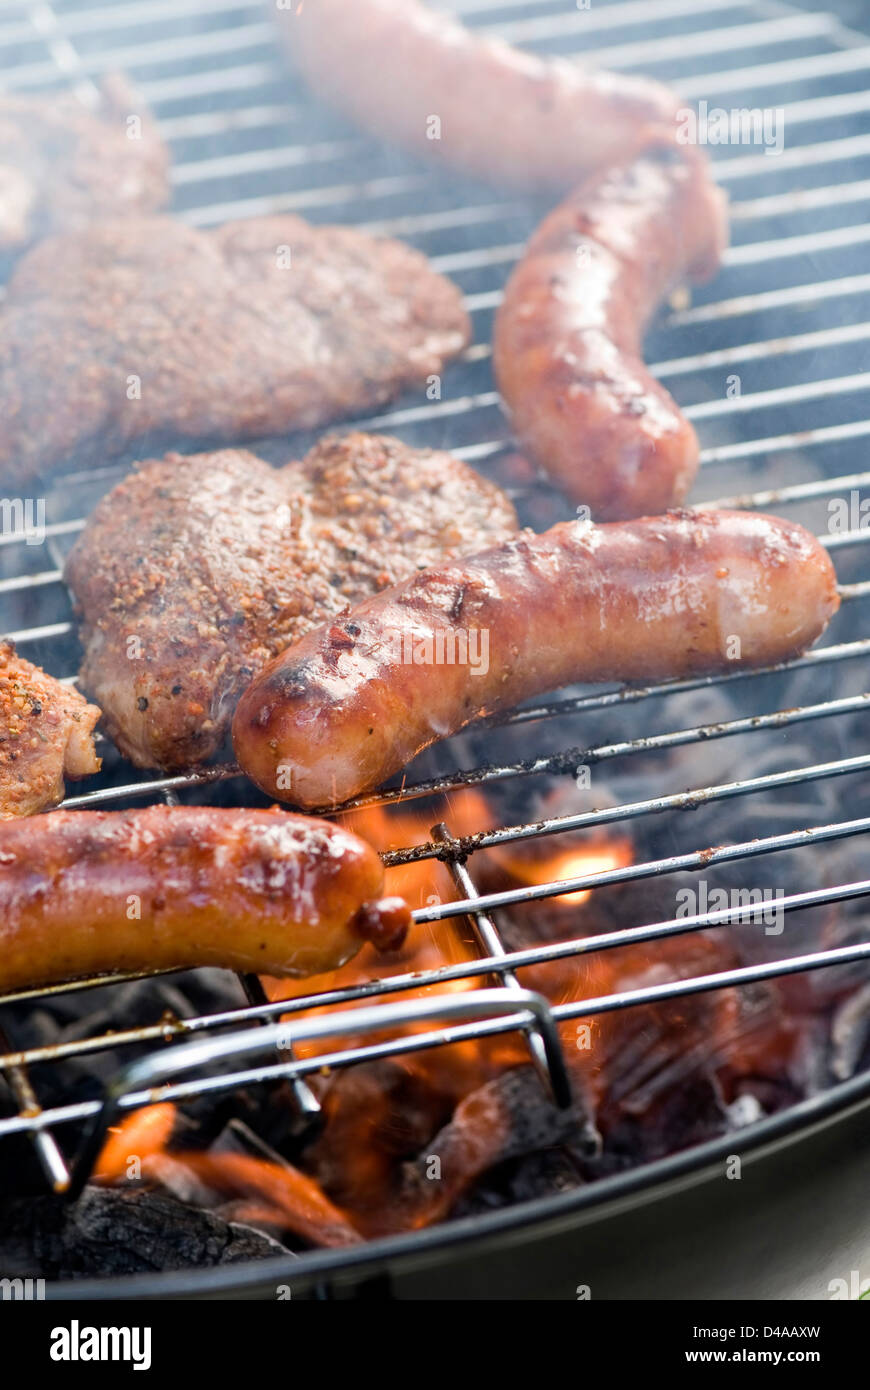 Sausages and hamburgers on barbecue Stock Photo